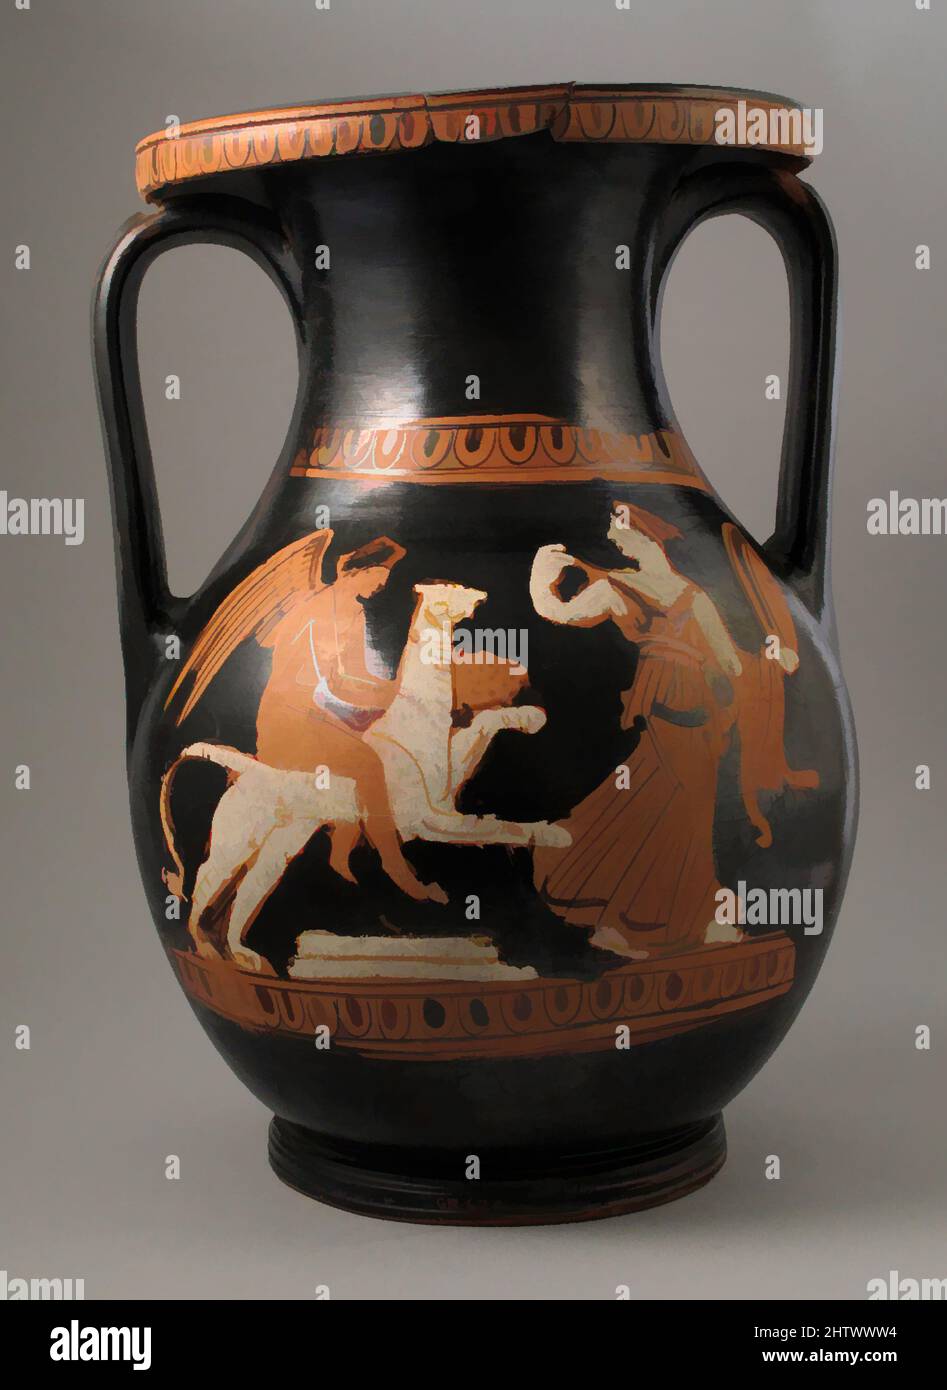 Art inspired by Pelike, Classical, ca. 400 B.C., Greek, Attic, Terracotta; red-figure, 9 1/2 × 6 5/8 in. (24.1 × 16.8 cm), Vases, Classic works modernized by Artotop with a splash of modernity. Shapes, color and value, eye-catching visual impact on art. Emotions through freedom of artworks in a contemporary way. A timeless message pursuing a wildly creative new direction. Artists turning to the digital medium and creating the Artotop NFT Stock Photo